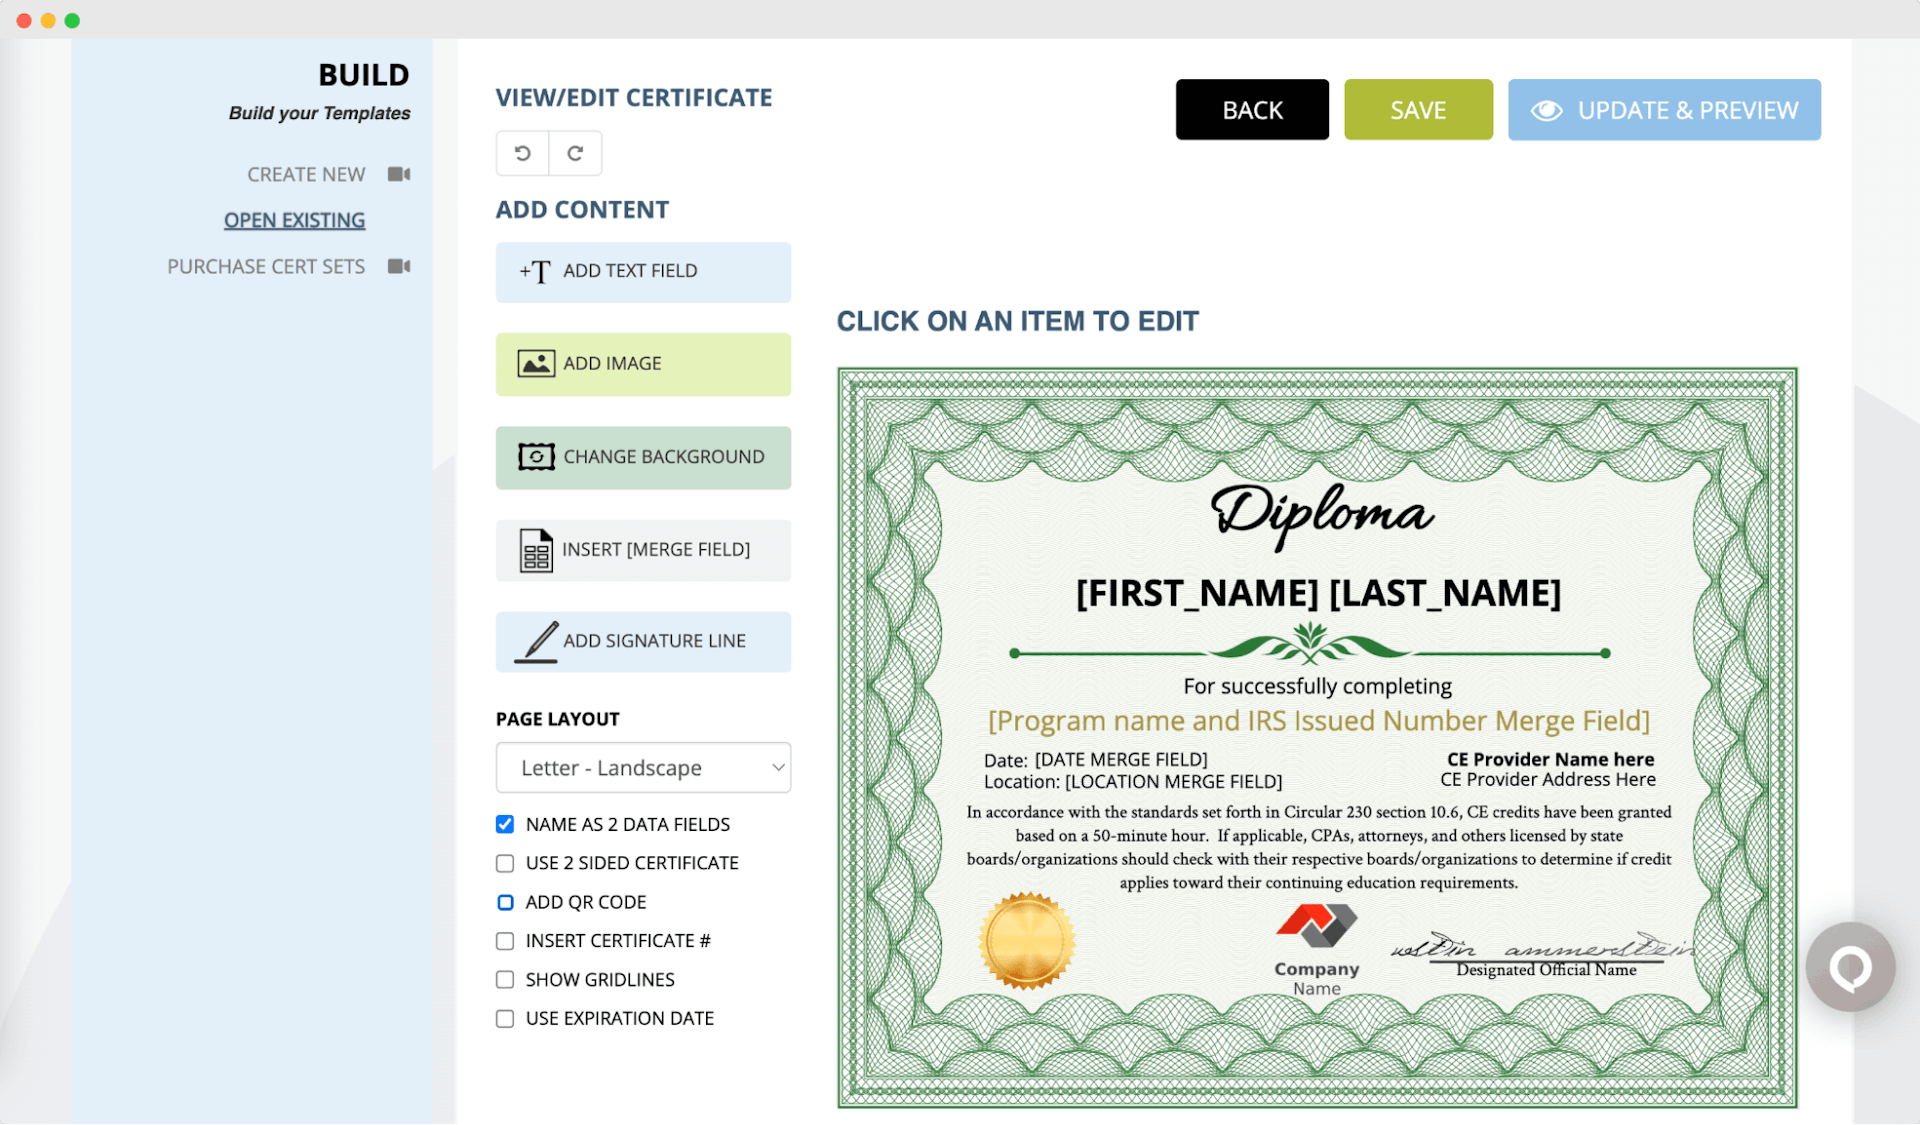 SimpleCert high school diploma generator interface showing a certificate template with customization options for adding text, images, and merge fields.